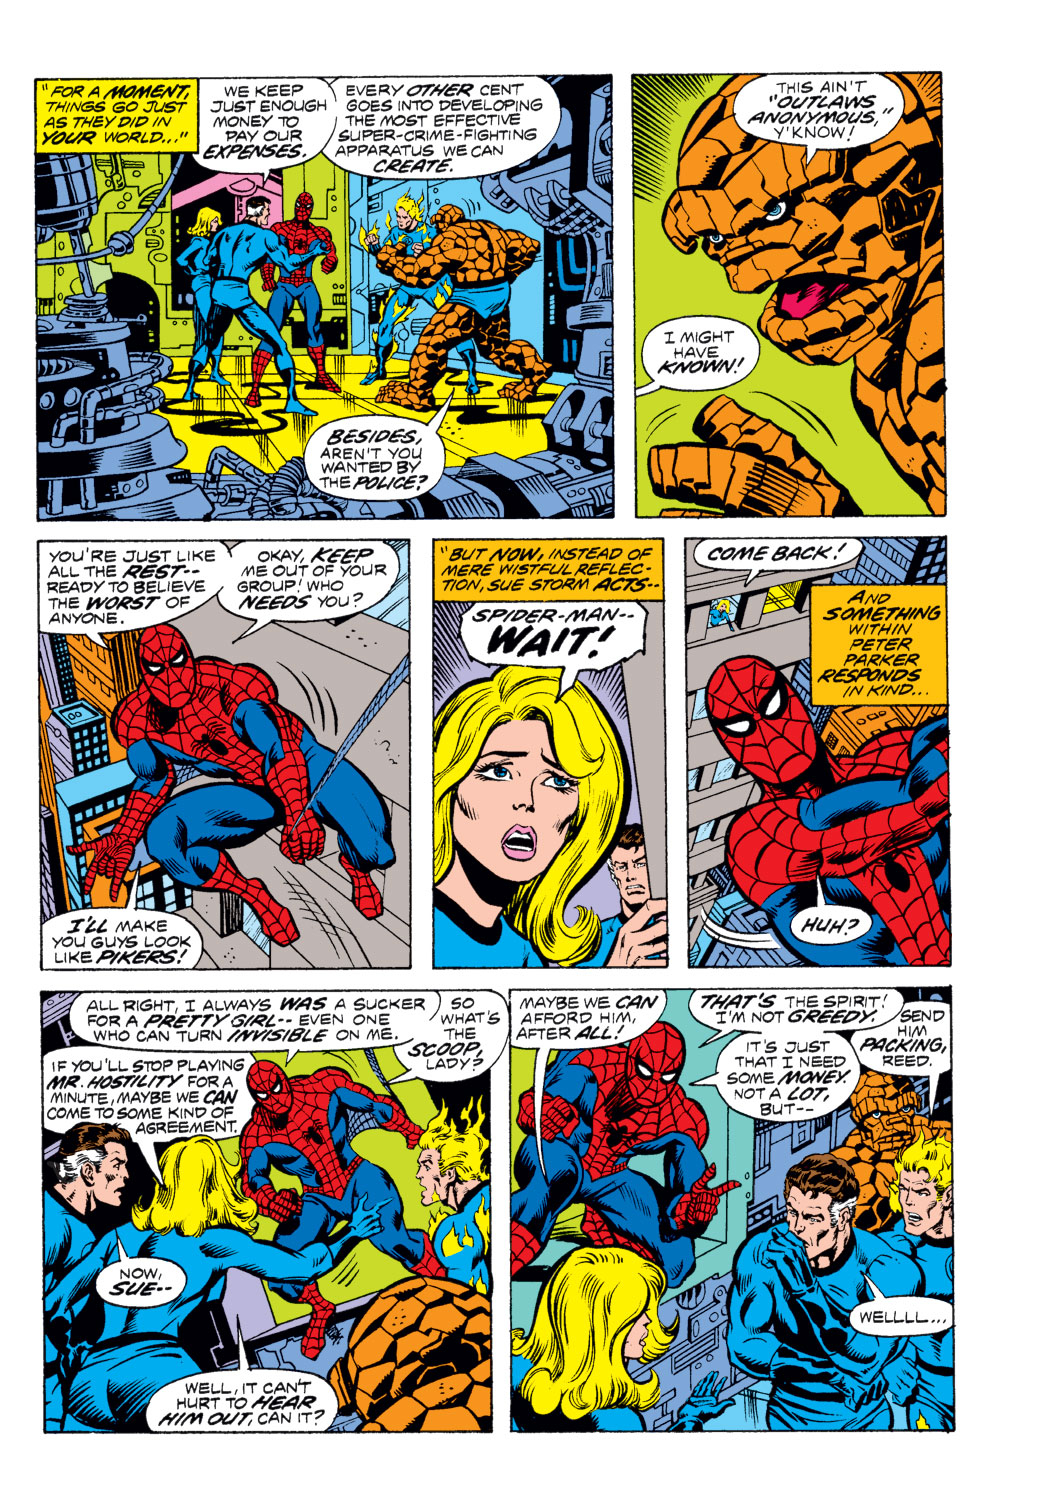 What If? (1977) issue 1 - Spider-Man joined the Fantastic Four - Page 10